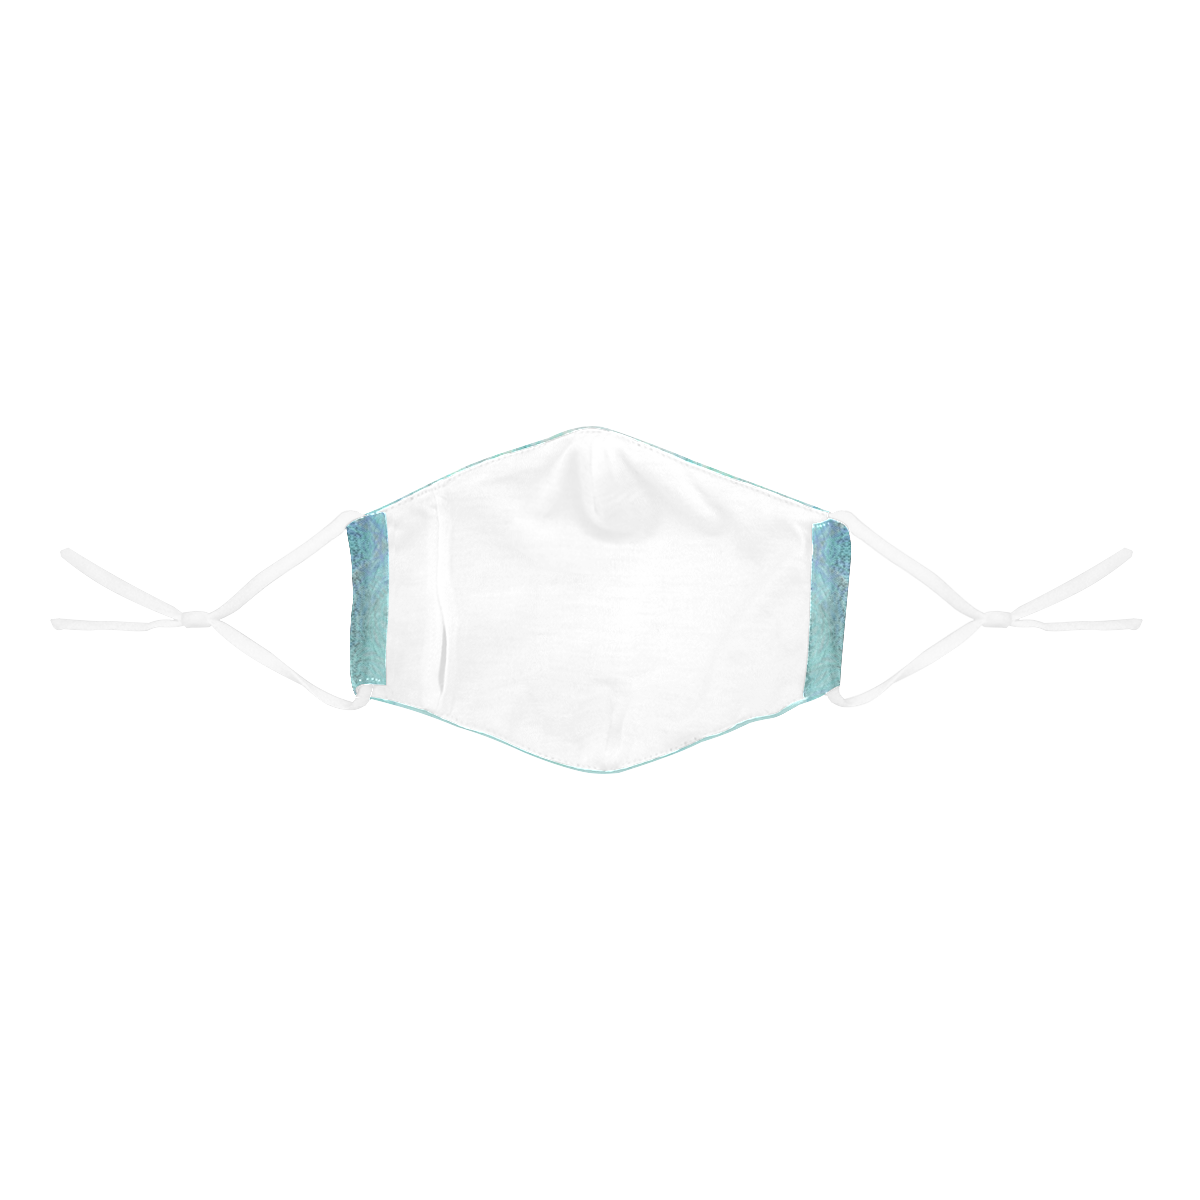 teal design 3D Mouth Mask with Drawstring (Pack of 10) (Model M04)